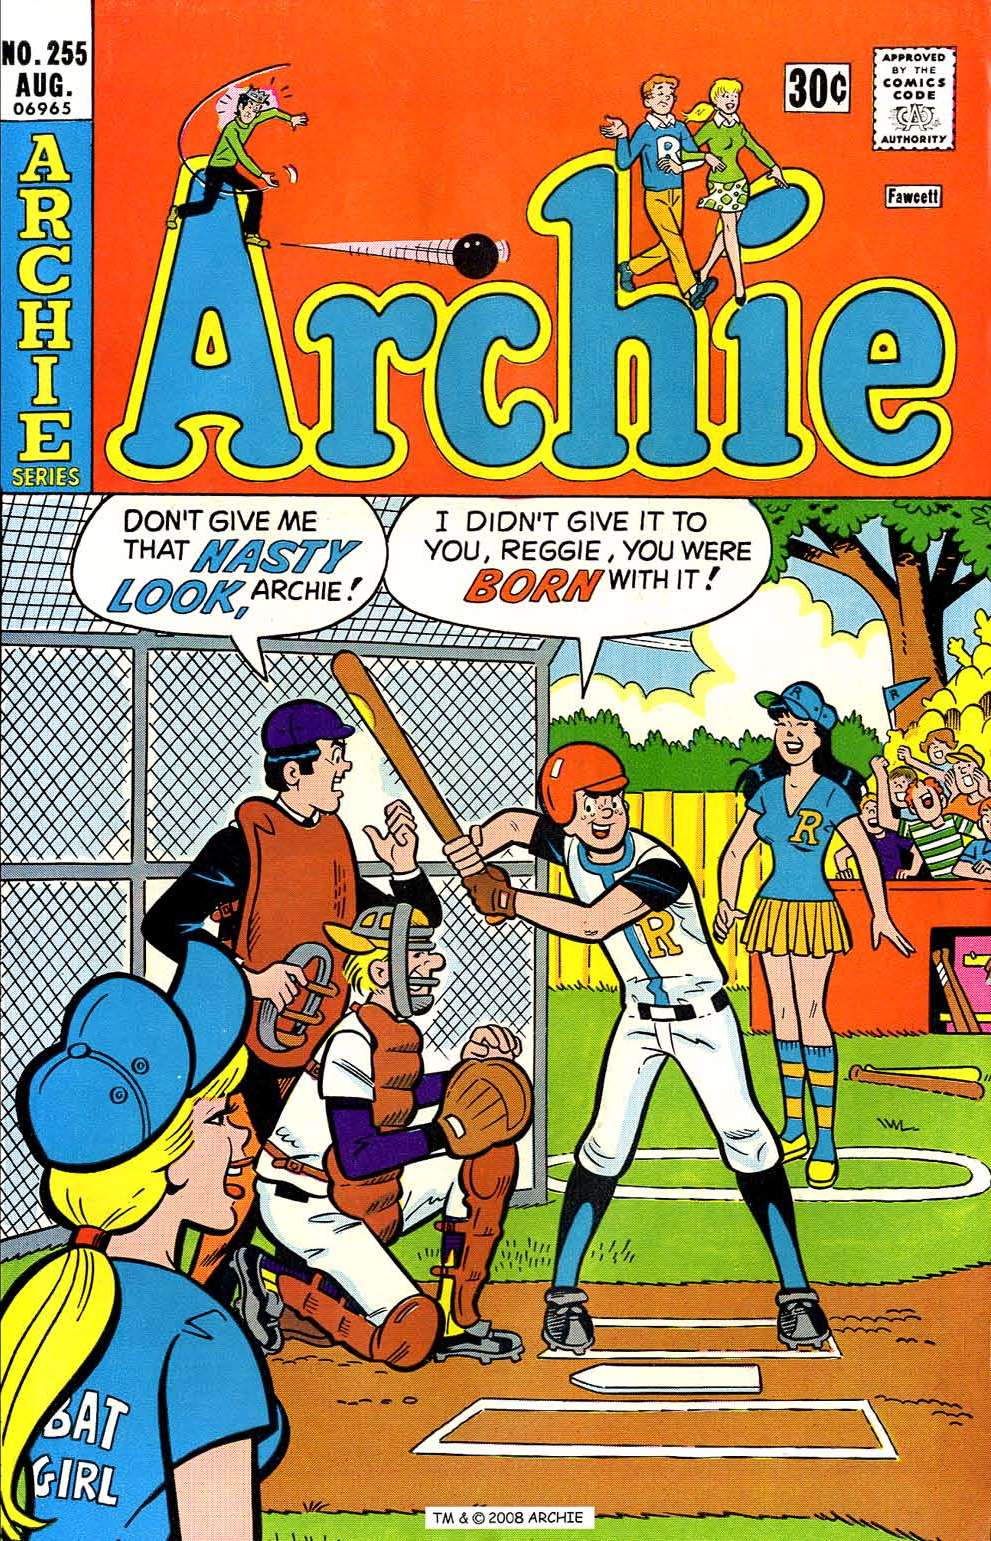 Read online Archie (1960) comic -  Issue #255 - 1